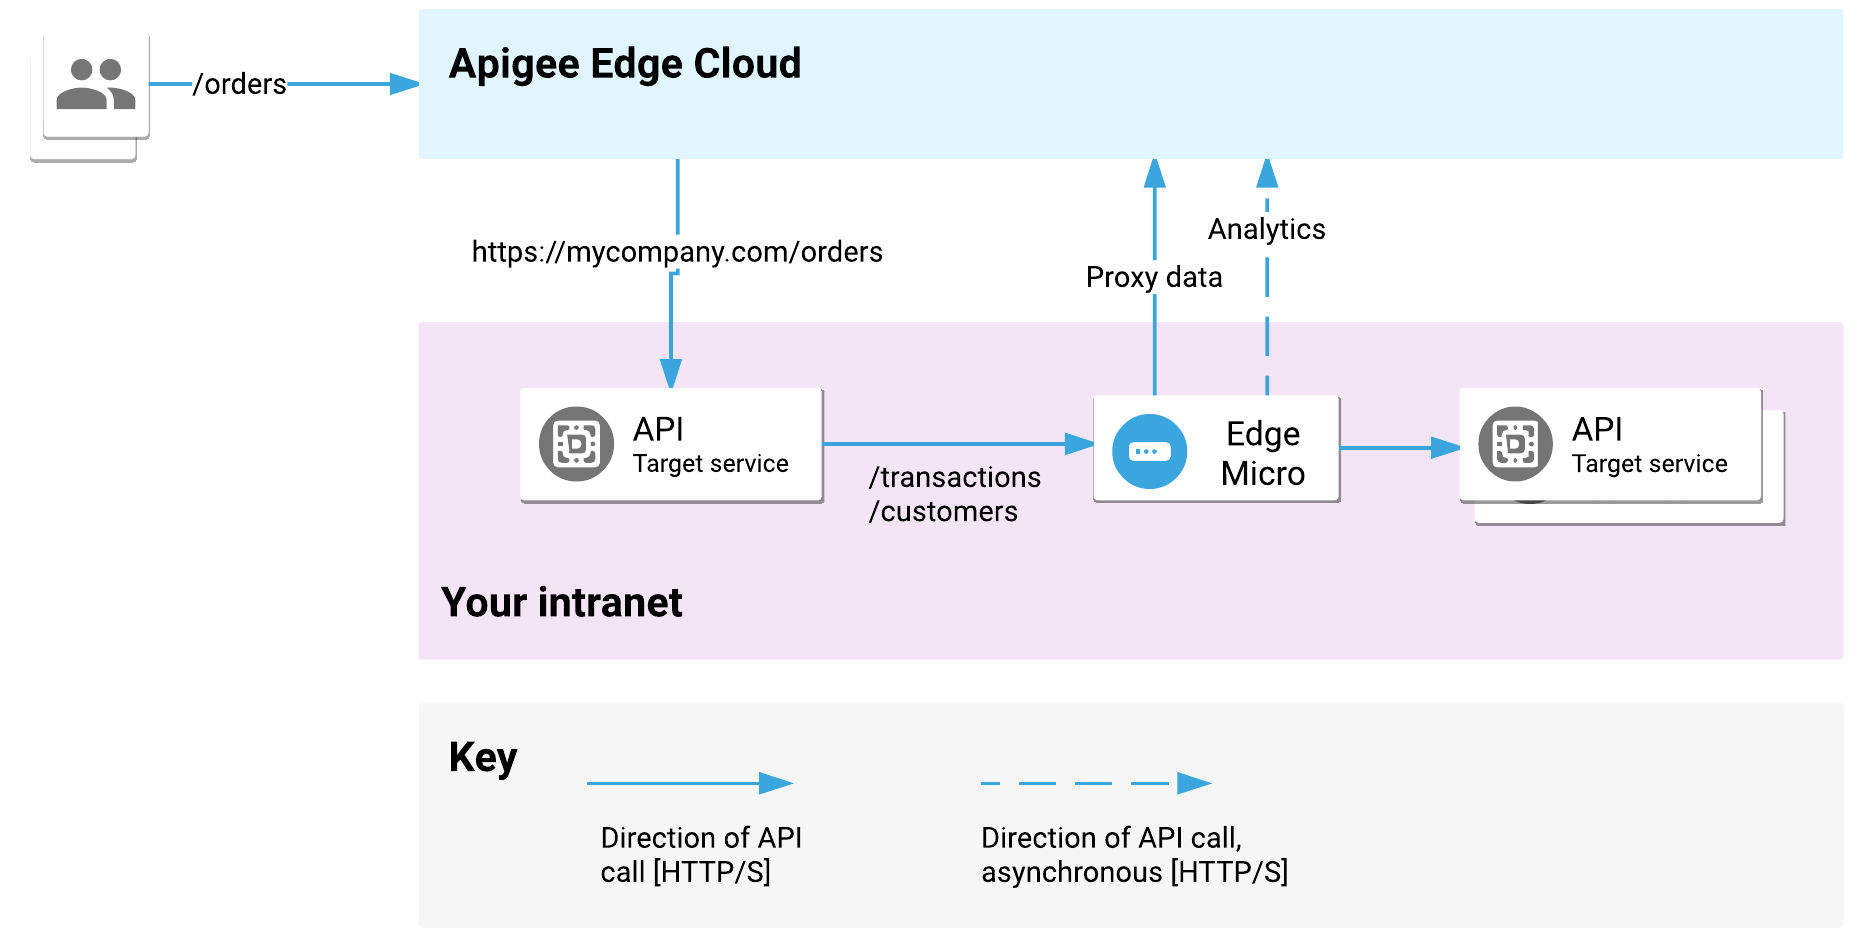 API proxies made to Edge Cloud are sent to target services on your intranet,
              and the target services send requests to Edge Microgateway on your intranet.
              The microgateway then sends requests to other target API services on your
              intranet.